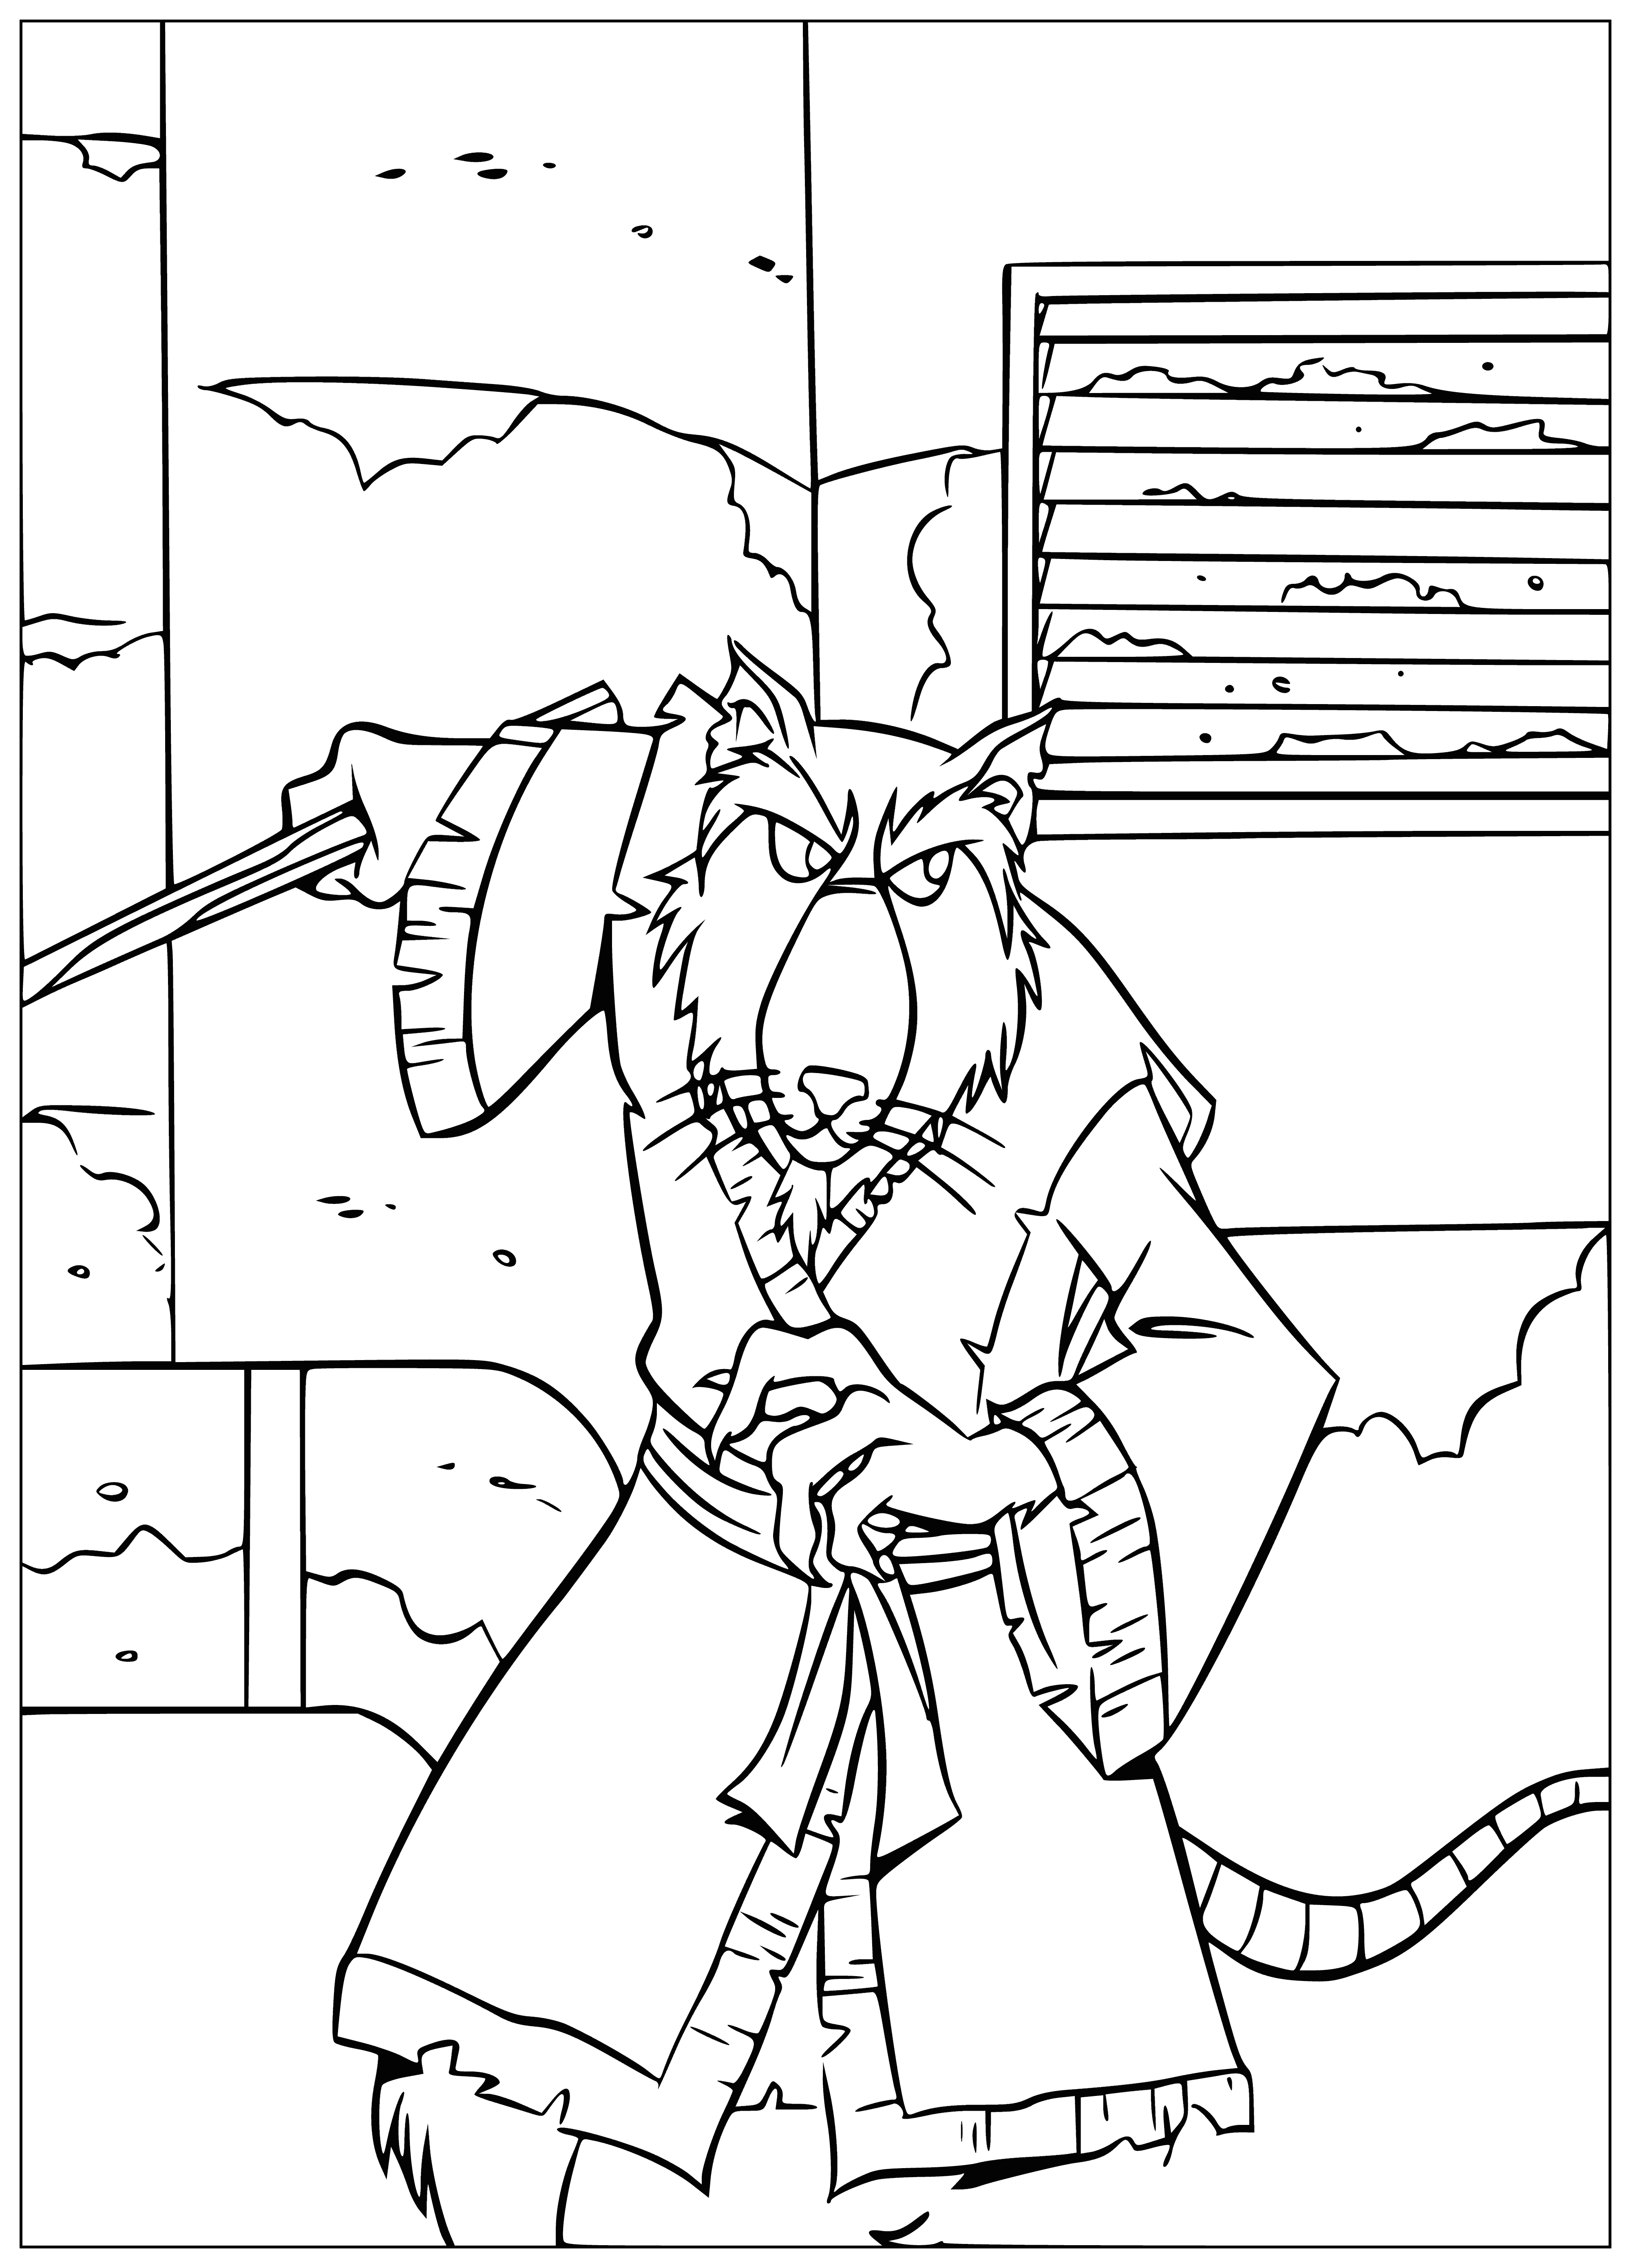 coloring page: A brown & white turtle & rat stand on two legs. Turtle has red bandana & sword, rat has purple robe & staff.